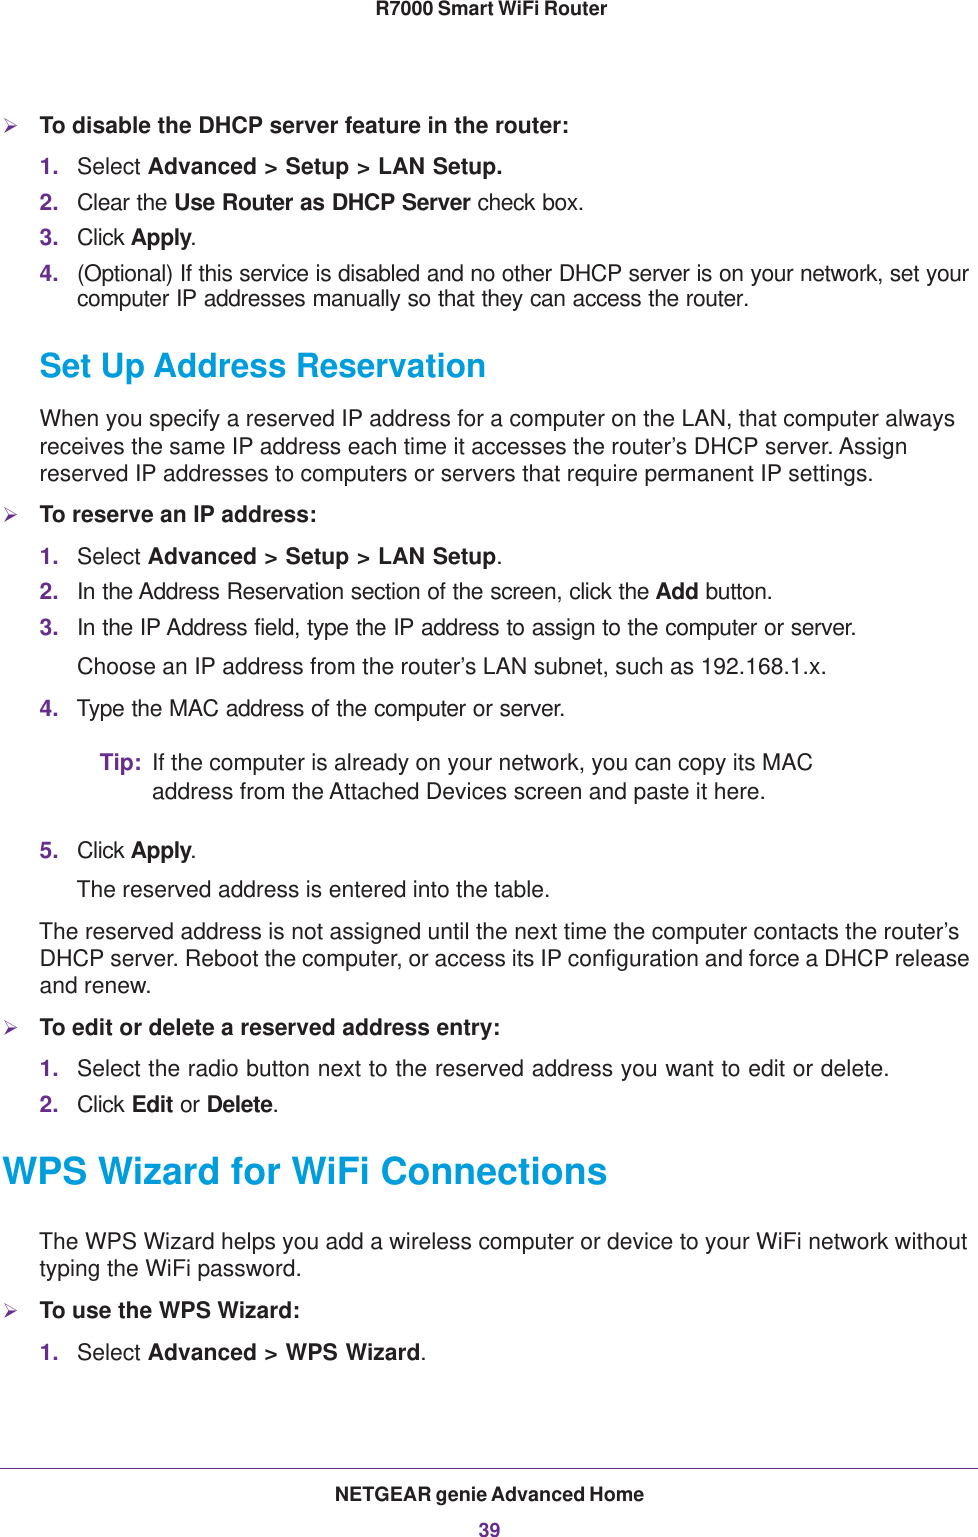 NETGEAR genie Advanced Home39 R7000 Smart WiFi RouterTo disable the DHCP server feature in the router:1. Select Advanced &gt; Setup &gt; LAN Setup.2. Clear the Use Router as DHCP Server check box.3. Click Apply.4. (Optional) If this service is disabled and no other DHCP server is on your network, set your computer IP addresses manually so that they can access the router.Set Up Address ReservationWhen you specify a reserved IP address for a computer on the LAN, that computer always receives the same IP address each time it accesses the router’s DHCP server. Assign reserved IP addresses to computers or servers that require permanent IP settings. To reserve an IP address: 1. Select Advanced &gt; Setup &gt; LAN Setup.2. In the Address Reservation section of the screen, click the Add button. 3. In the IP Address field, type the IP address to assign to the computer or server. Choose an IP address from the router’s LAN subnet, such as 192.168.1.x. 4. Type the MAC address of the computer or server.Tip: If the computer is already on your network, you can copy its MAC address from the Attached Devices screen and paste it here.5. Click Apply.The reserved address is entered into the table. The reserved address is not assigned until the next time the computer contacts the router’s DHCP server. Reboot the computer, or access its IP configuration and force a DHCP release and renew.To edit or delete a reserved address entry:1. Select the radio button next to the reserved address you want to edit or delete. 2. Click Edit or Delete.WPS Wizard for WiFi ConnectionsThe WPS Wizard helps you add a wireless computer or device to your WiFi network without typing the WiFi password.To use the WPS Wizard:1. Select Advanced &gt; WPS Wizard.